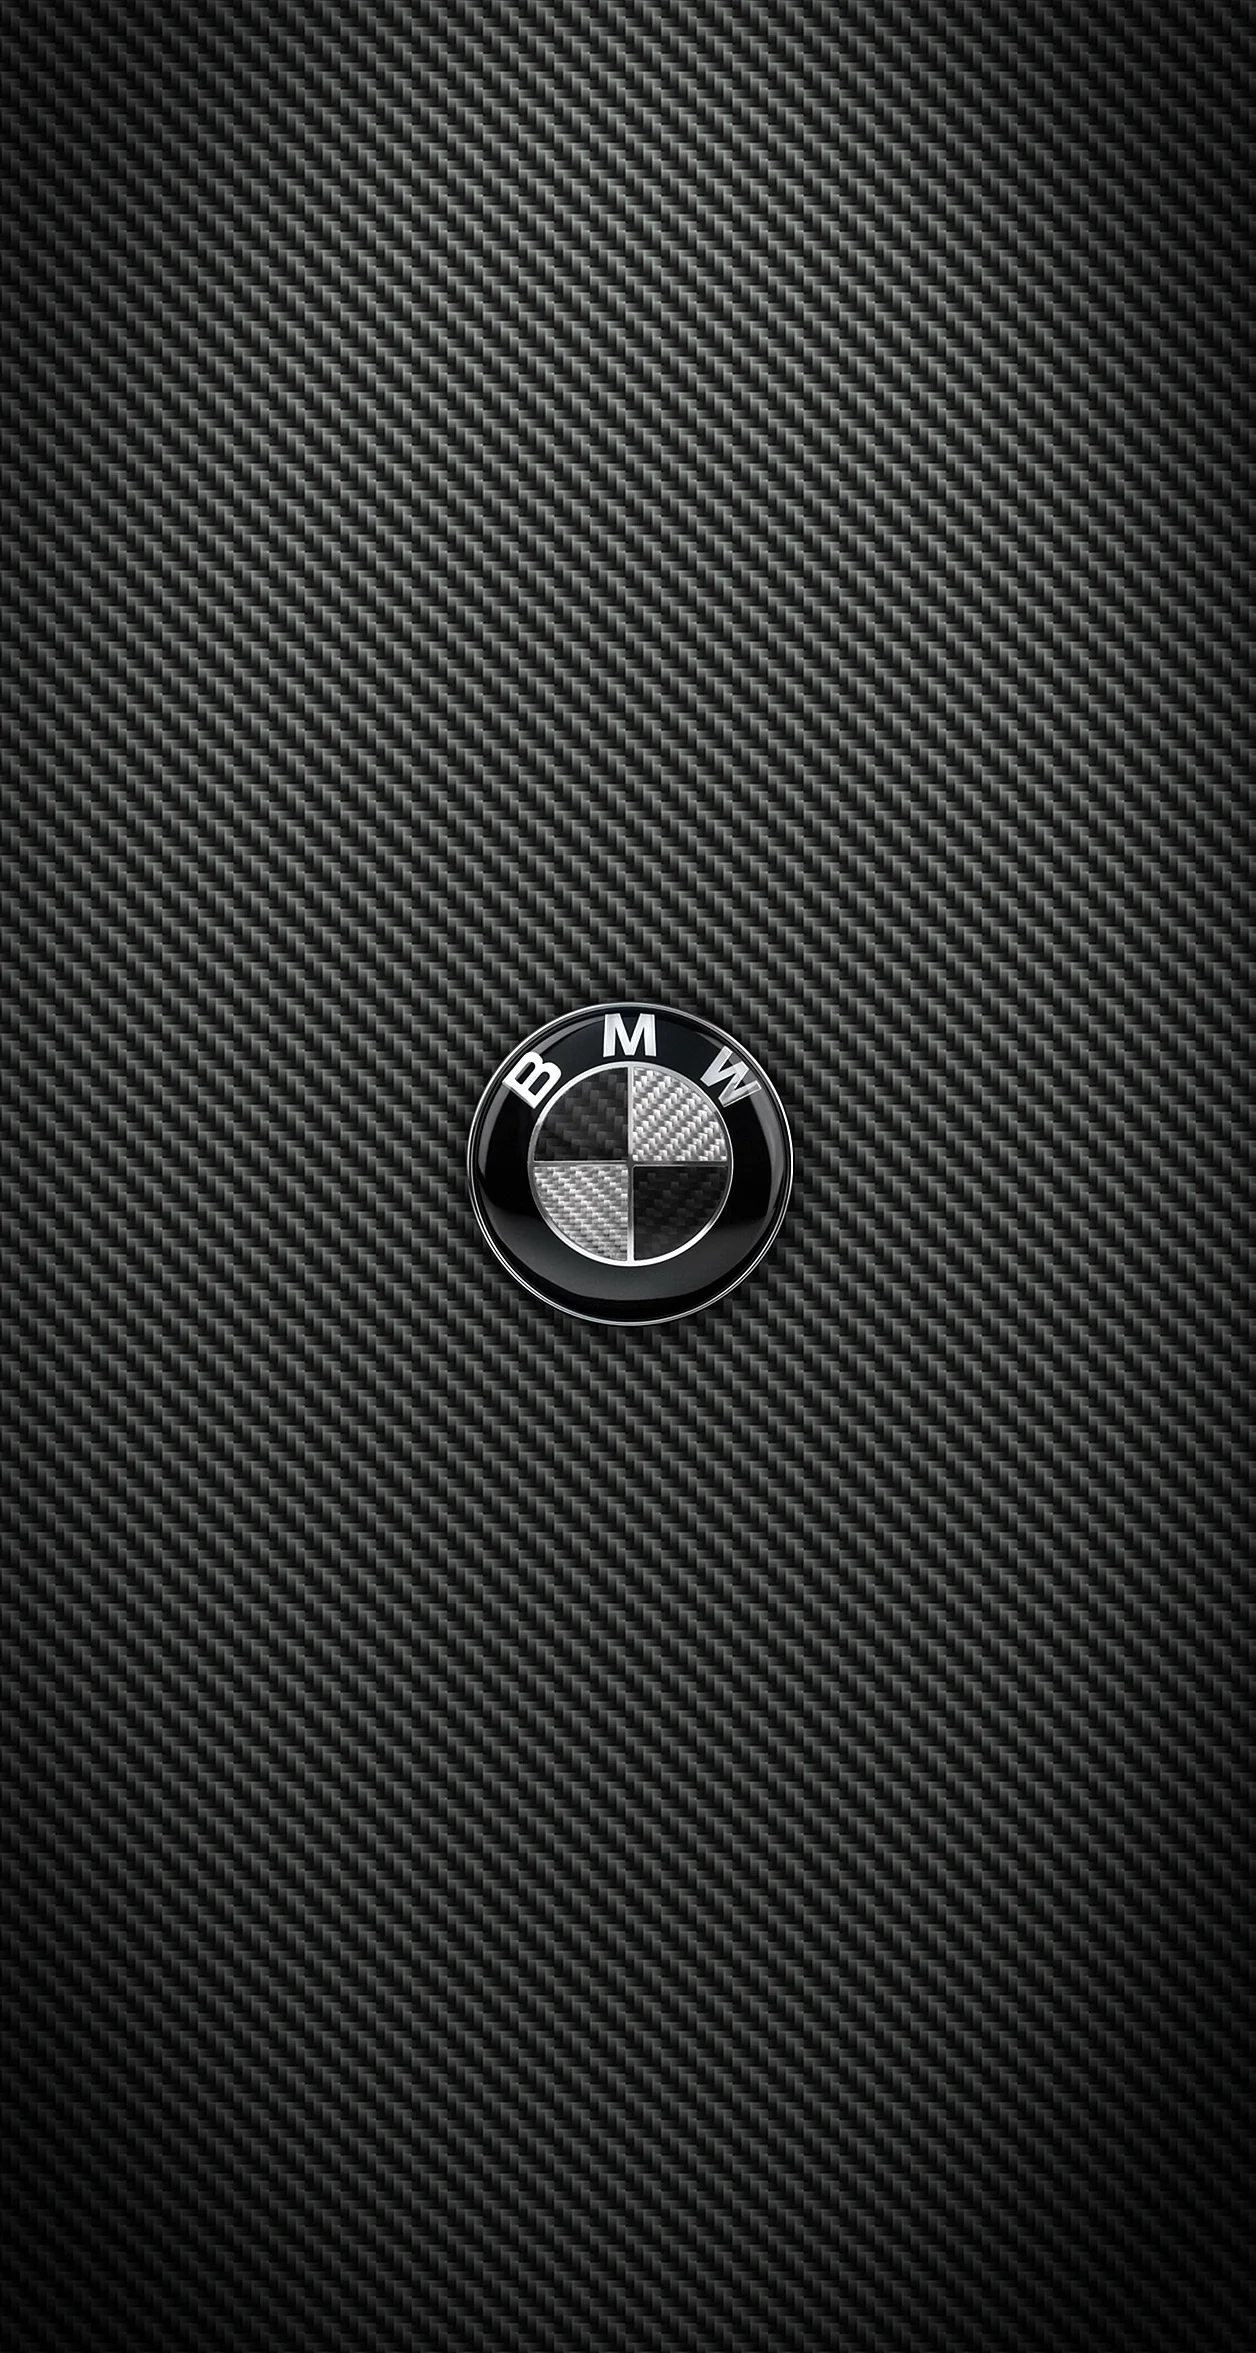 Bmw Logo Wallpaper For iPhone